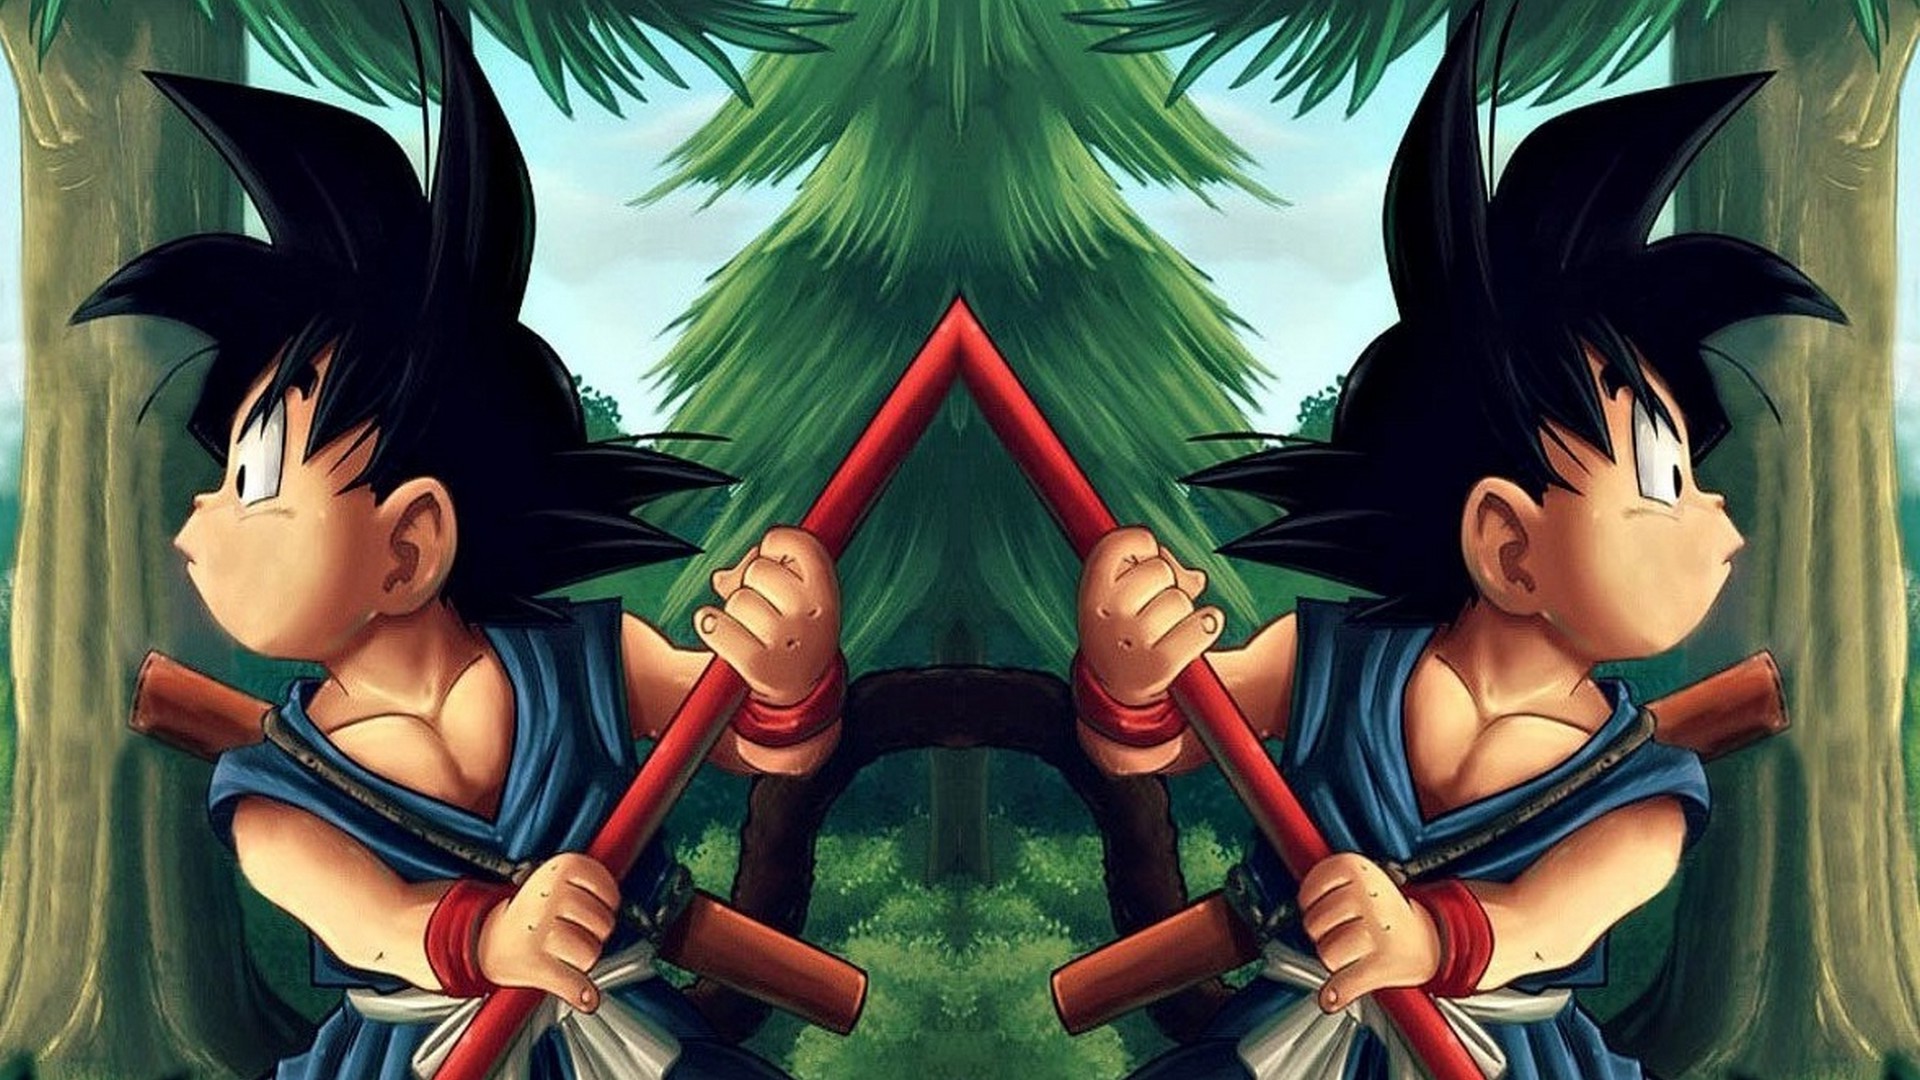 Kid Goku Background Wallpaper HD With Resolution 1920X1080 pixel. You can make this wallpaper for your Desktop Computer Backgrounds, Mac Wallpapers, Android Lock screen or iPhone Screensavers